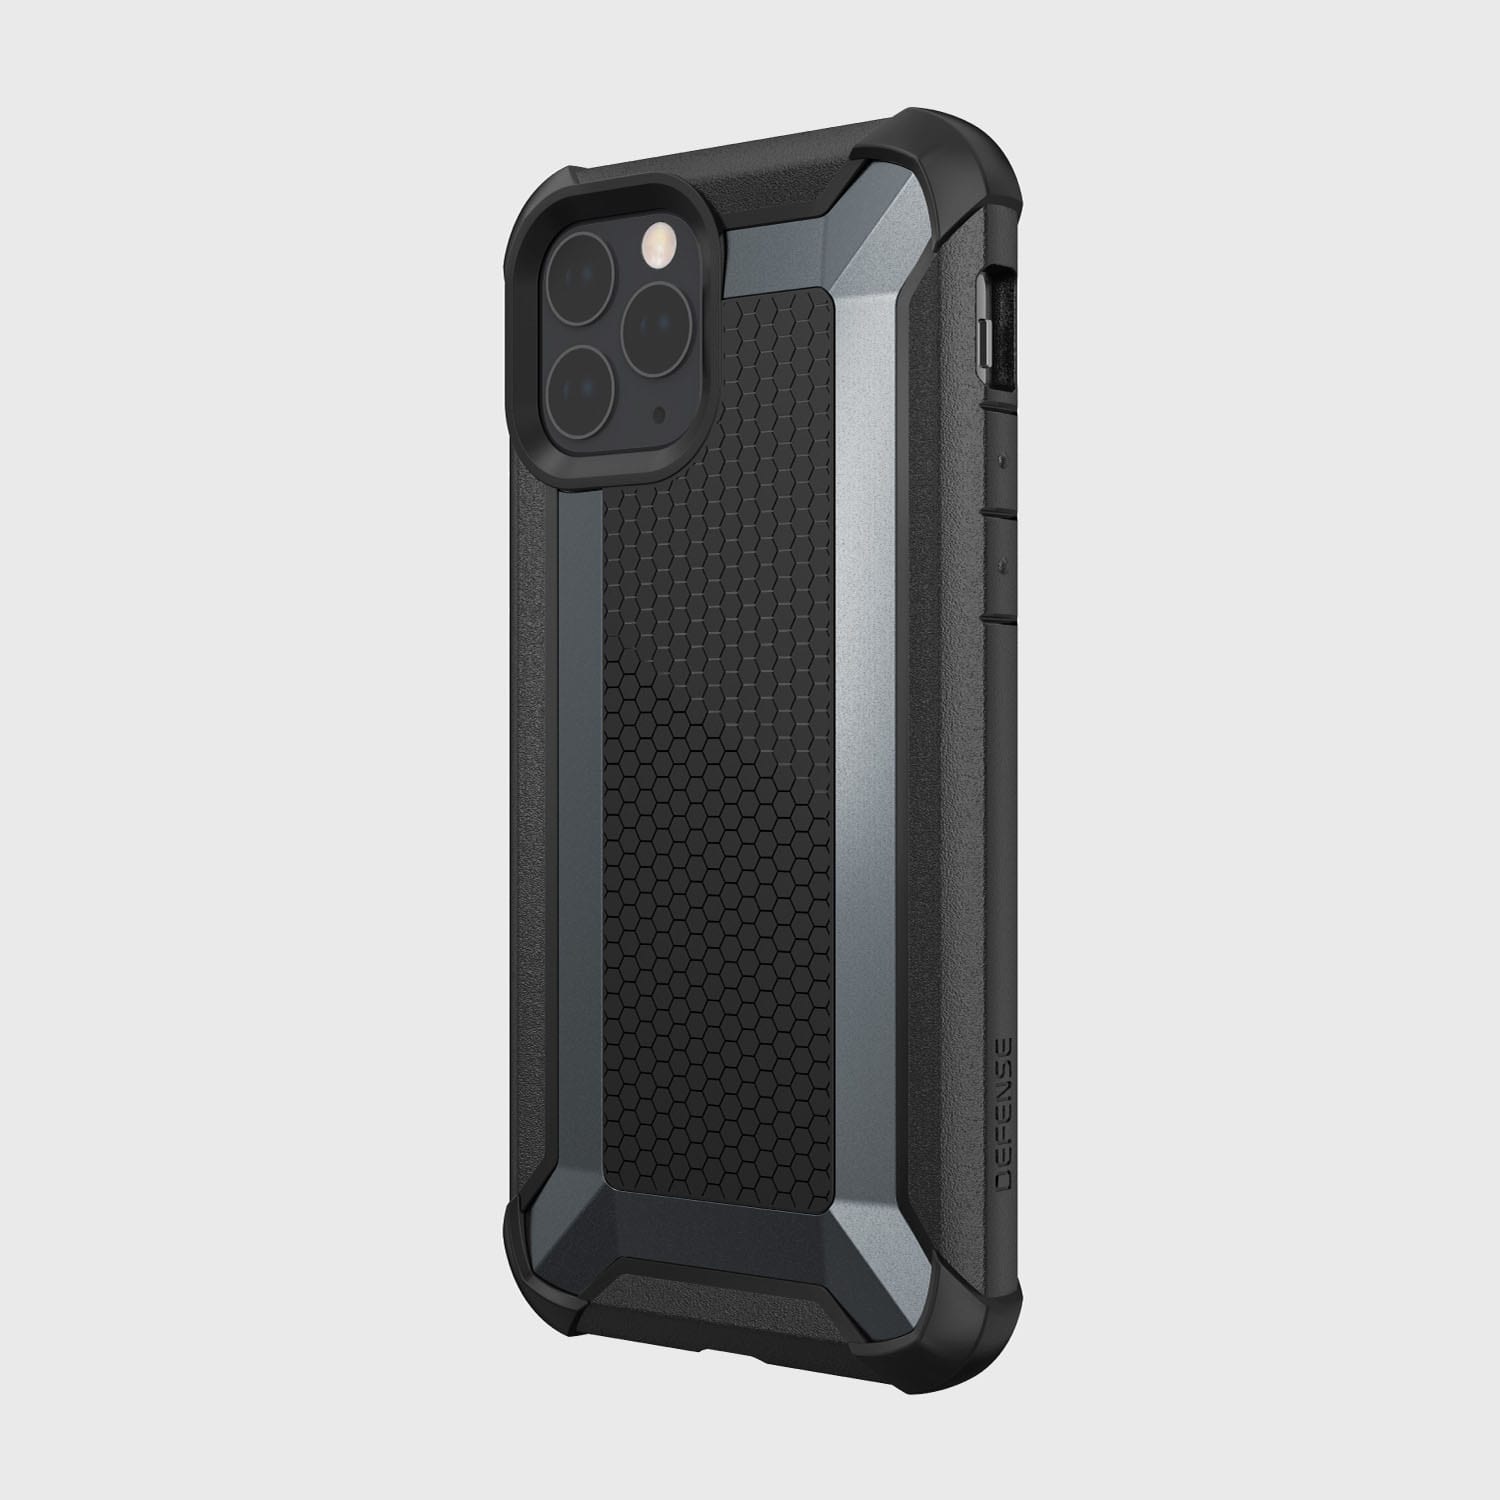 The iPhone 11 Pro Max Case - TACTICAL, featuring Raptic protective design, is showcased against a clean white backdrop. With its shock-absorbing rubber exterior and compliance to Military Standard MIL-STD-810